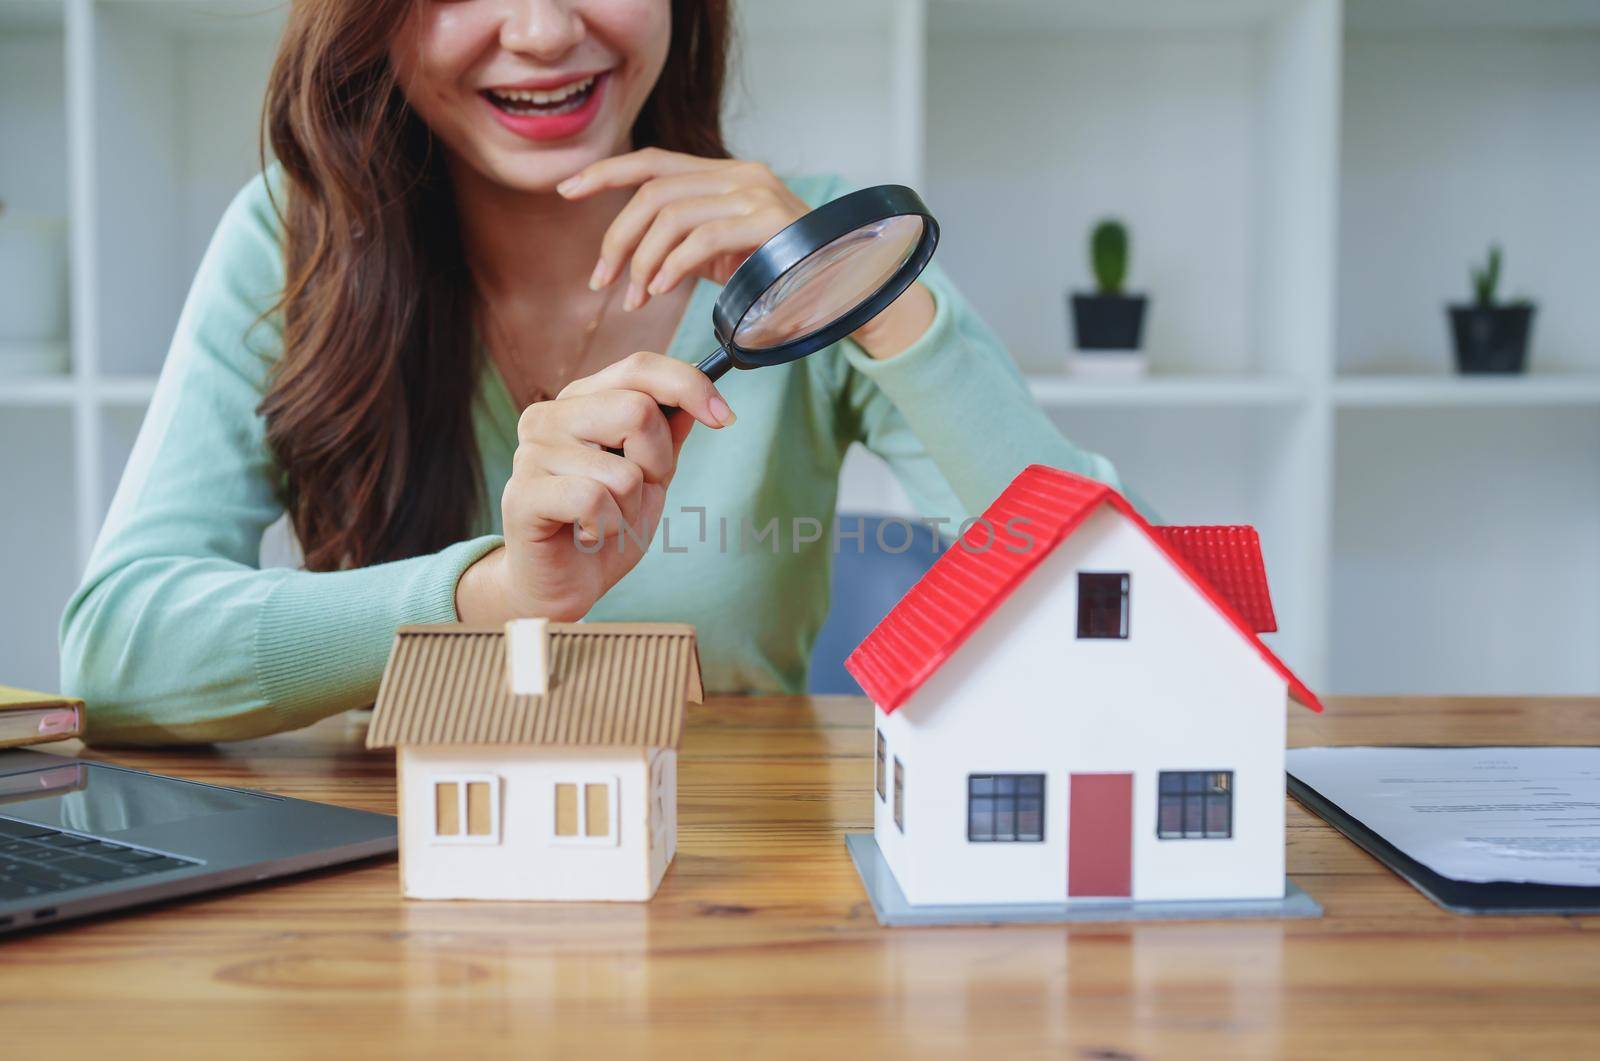 Customer holding a magnifying glass to select a house model, residential inspection concept by Manastrong